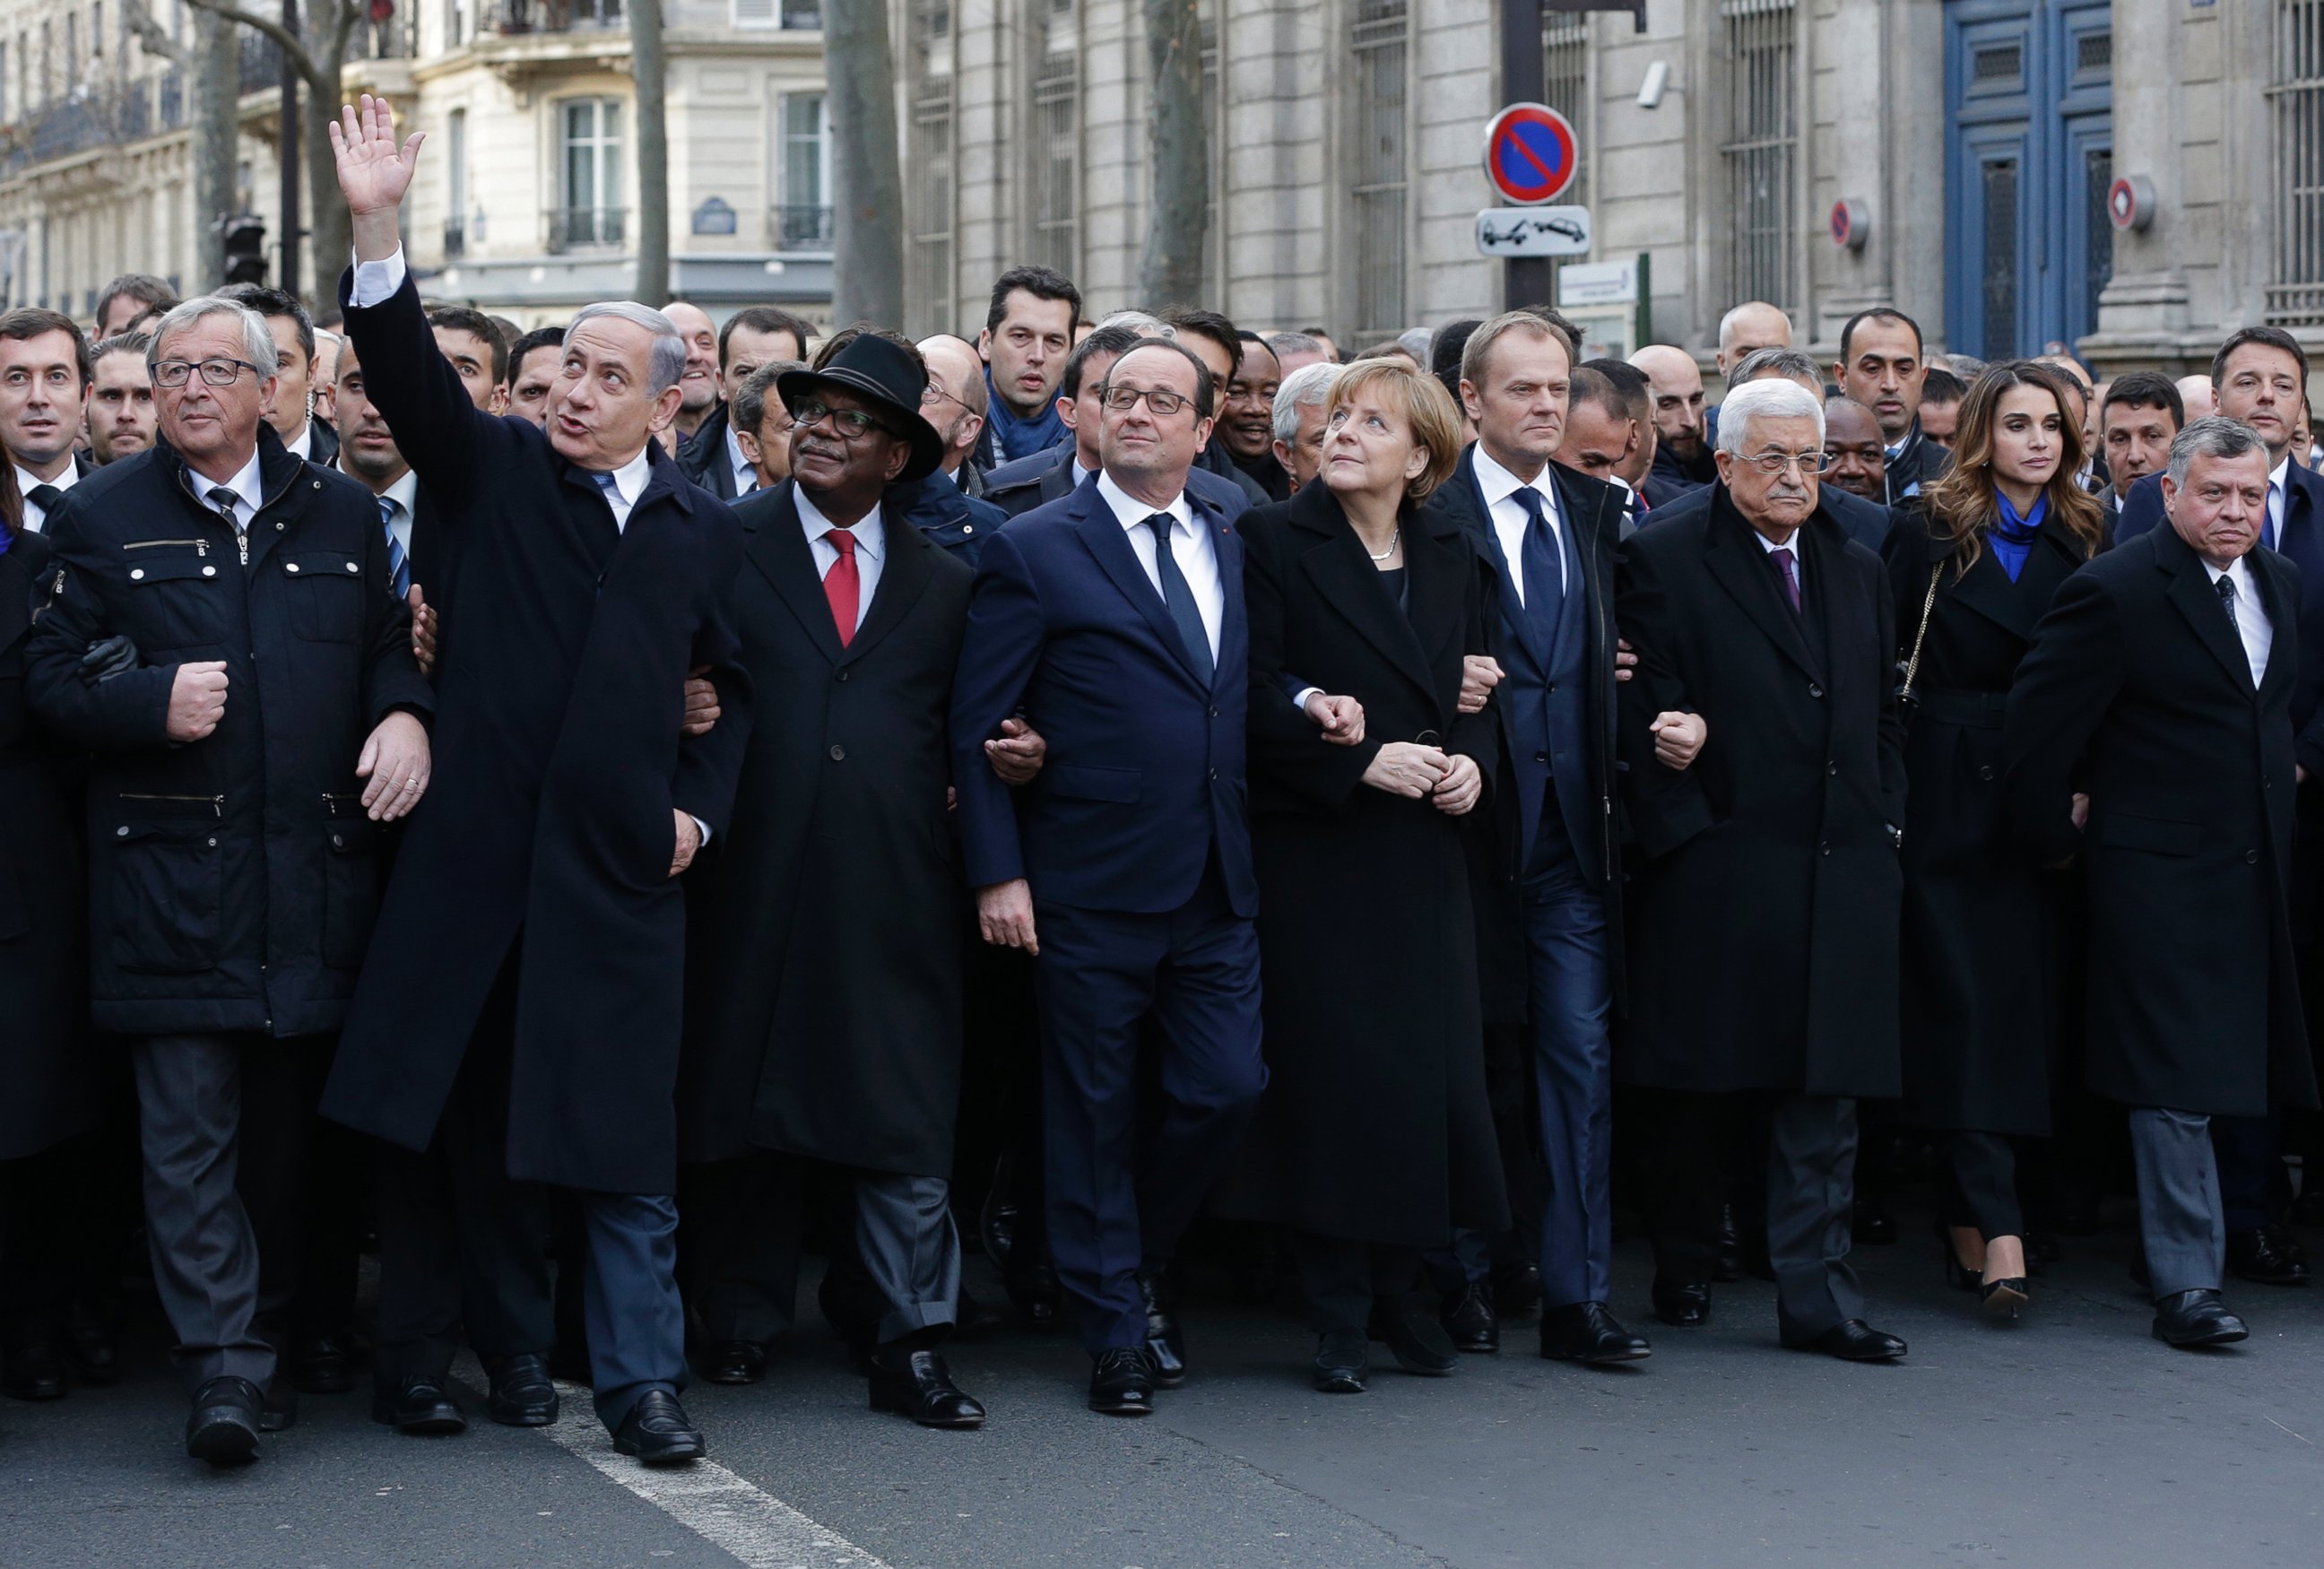 PHOTO: French President Francois Hollande is surrounded by head of states as they attend the solidarity march (Marche Republicaine) in the streets of Paris, Jan. 11, 2015. 